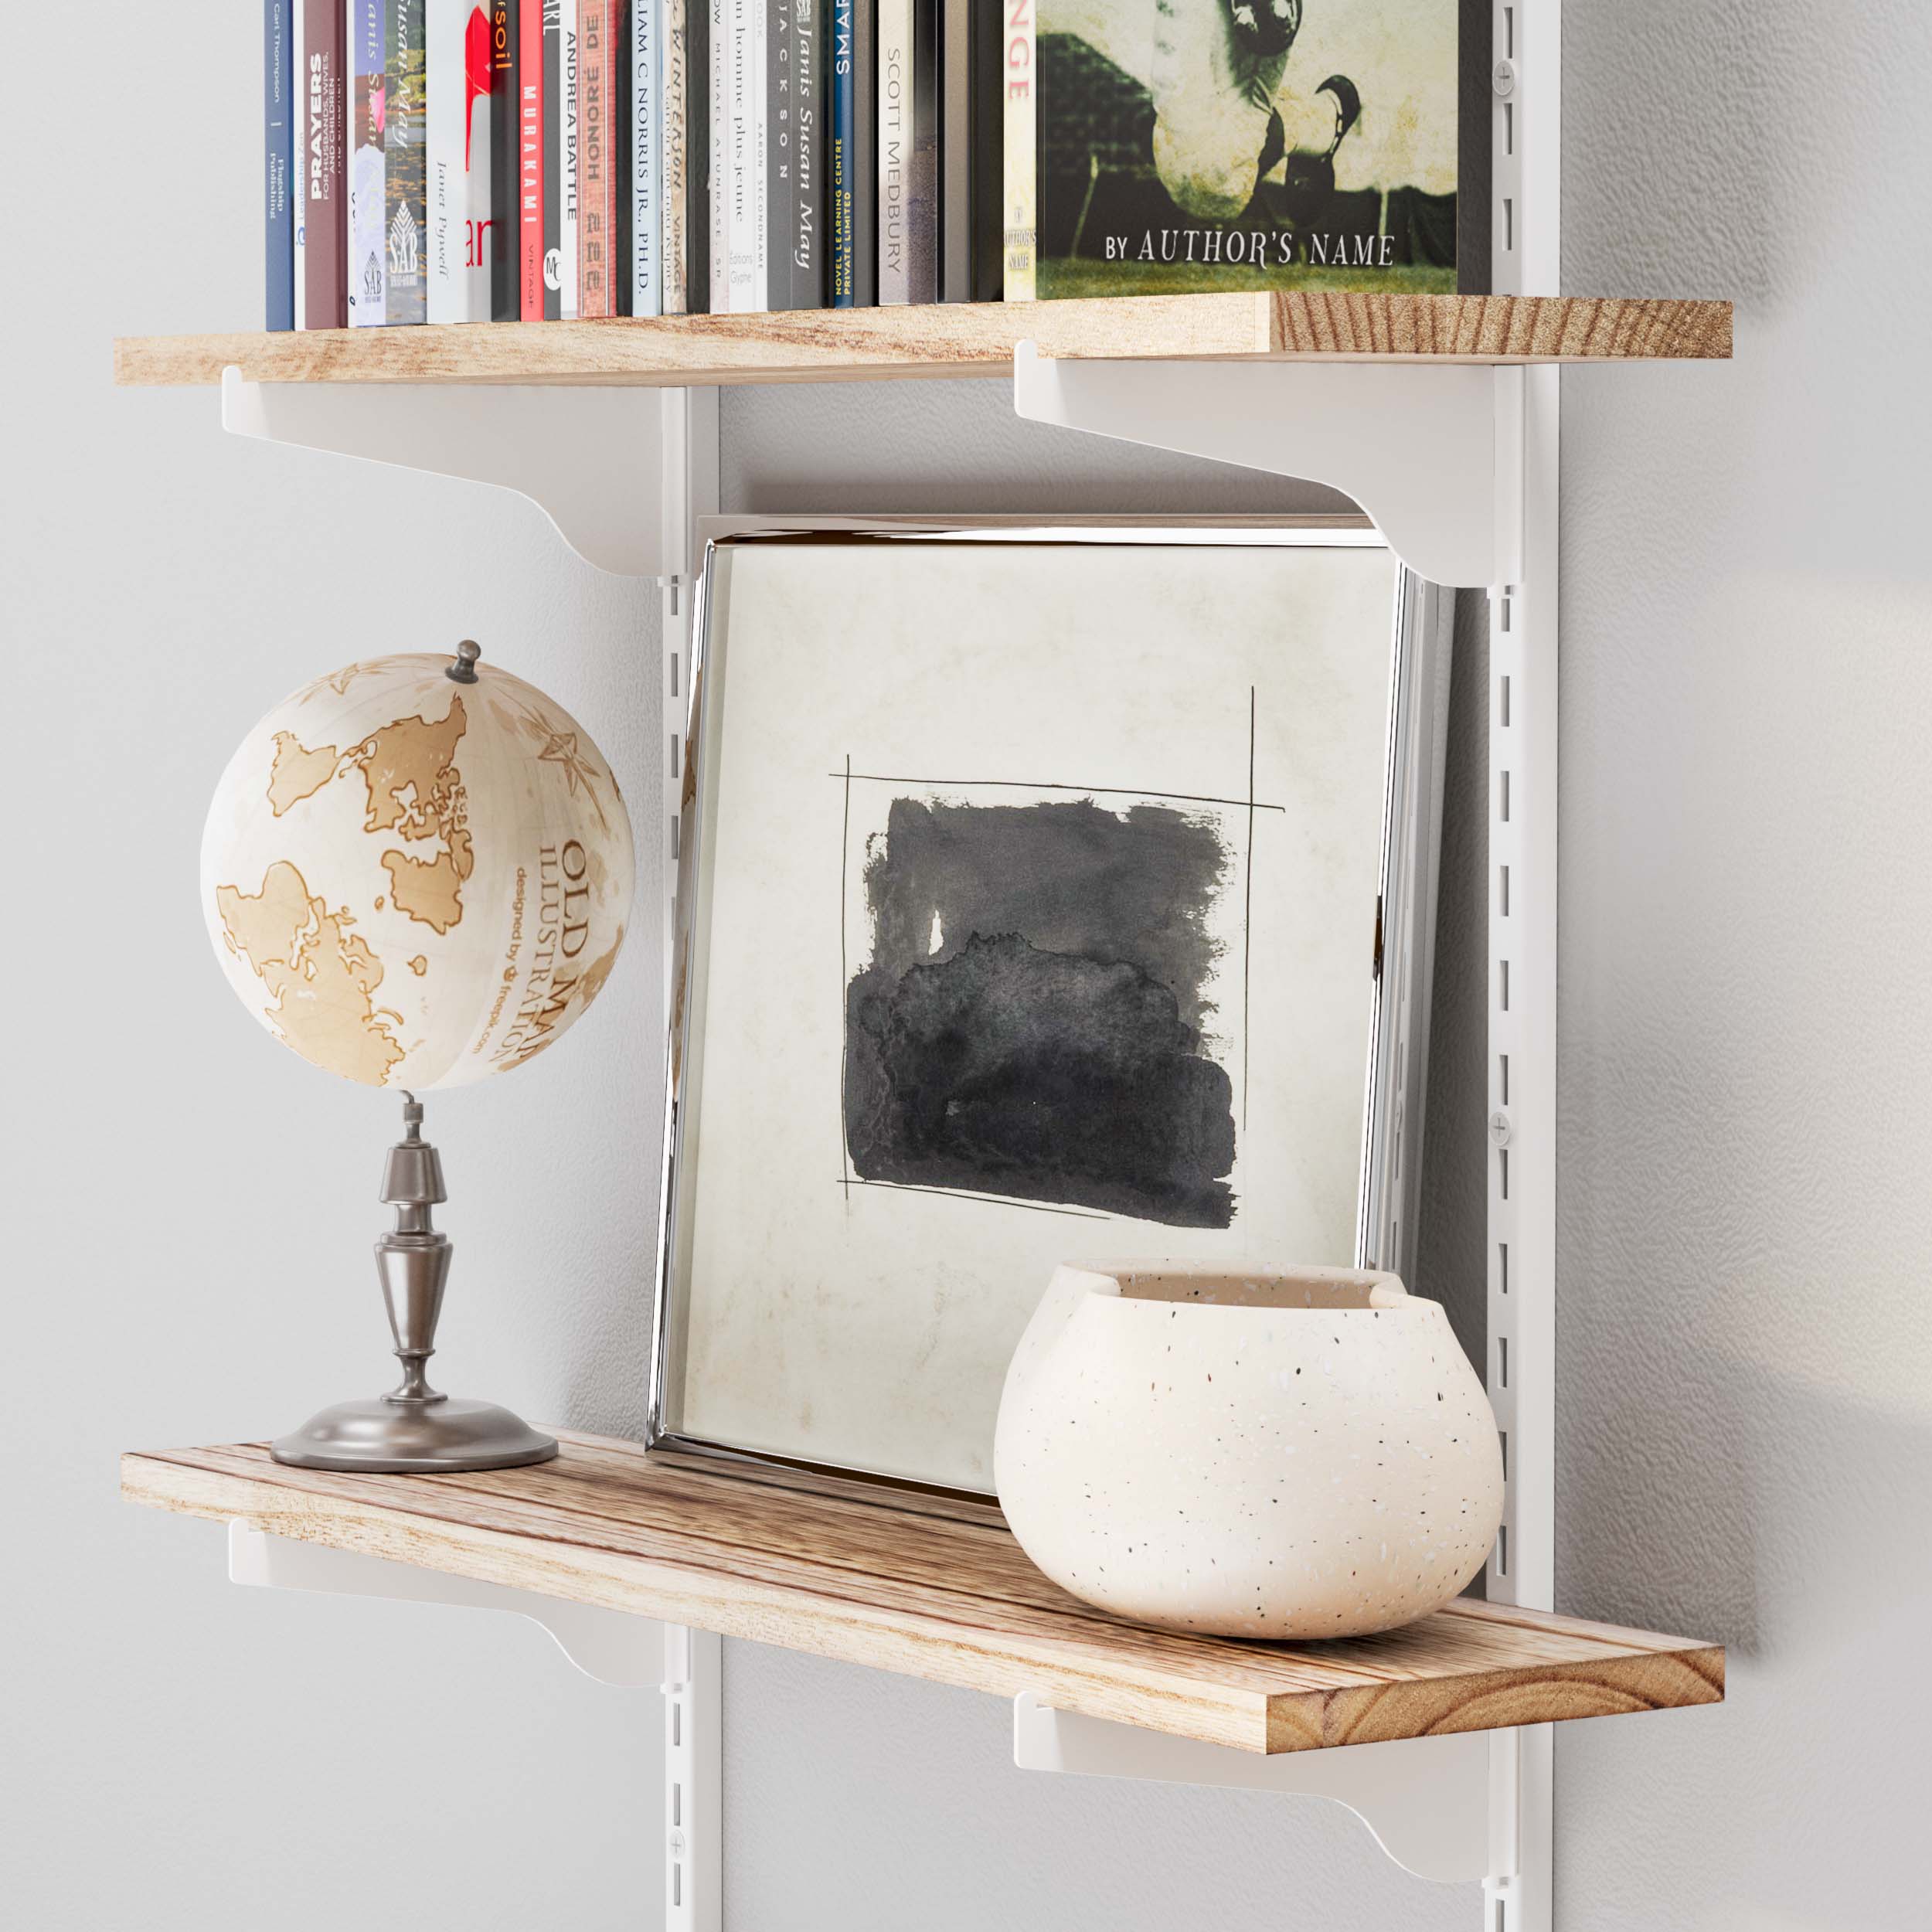 A close-up of adjustable floating shelves with a globe, books, and a ceramic vase against a textured wall.